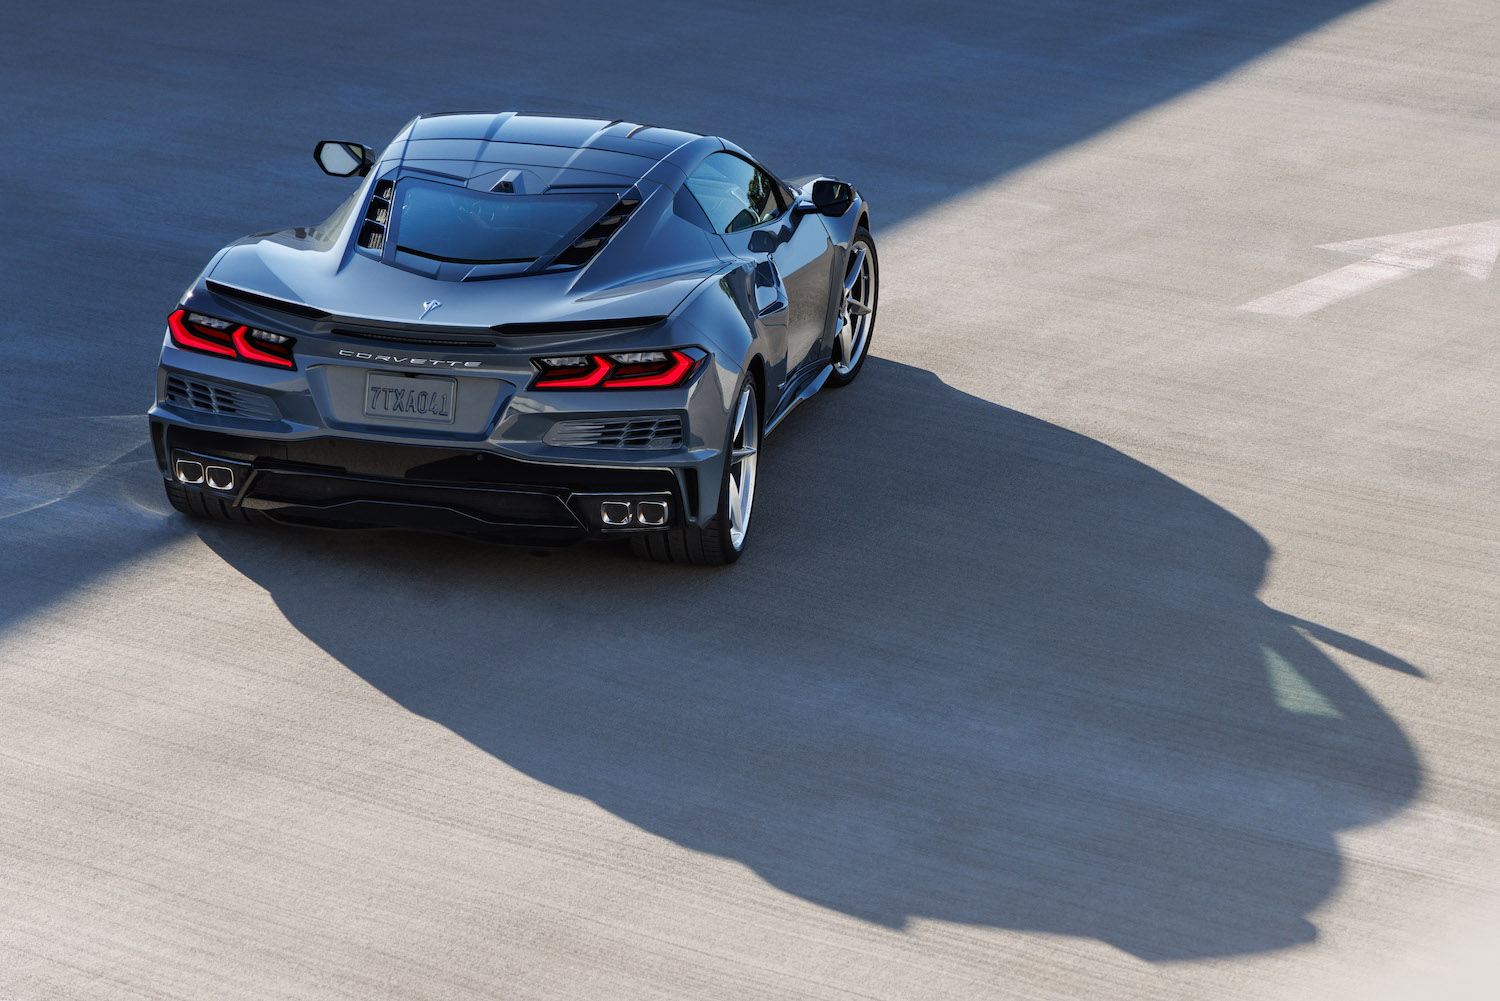 Promo photo of the rear of a Corvette E-Ray hybrid with eAWD technology parked on concrete.